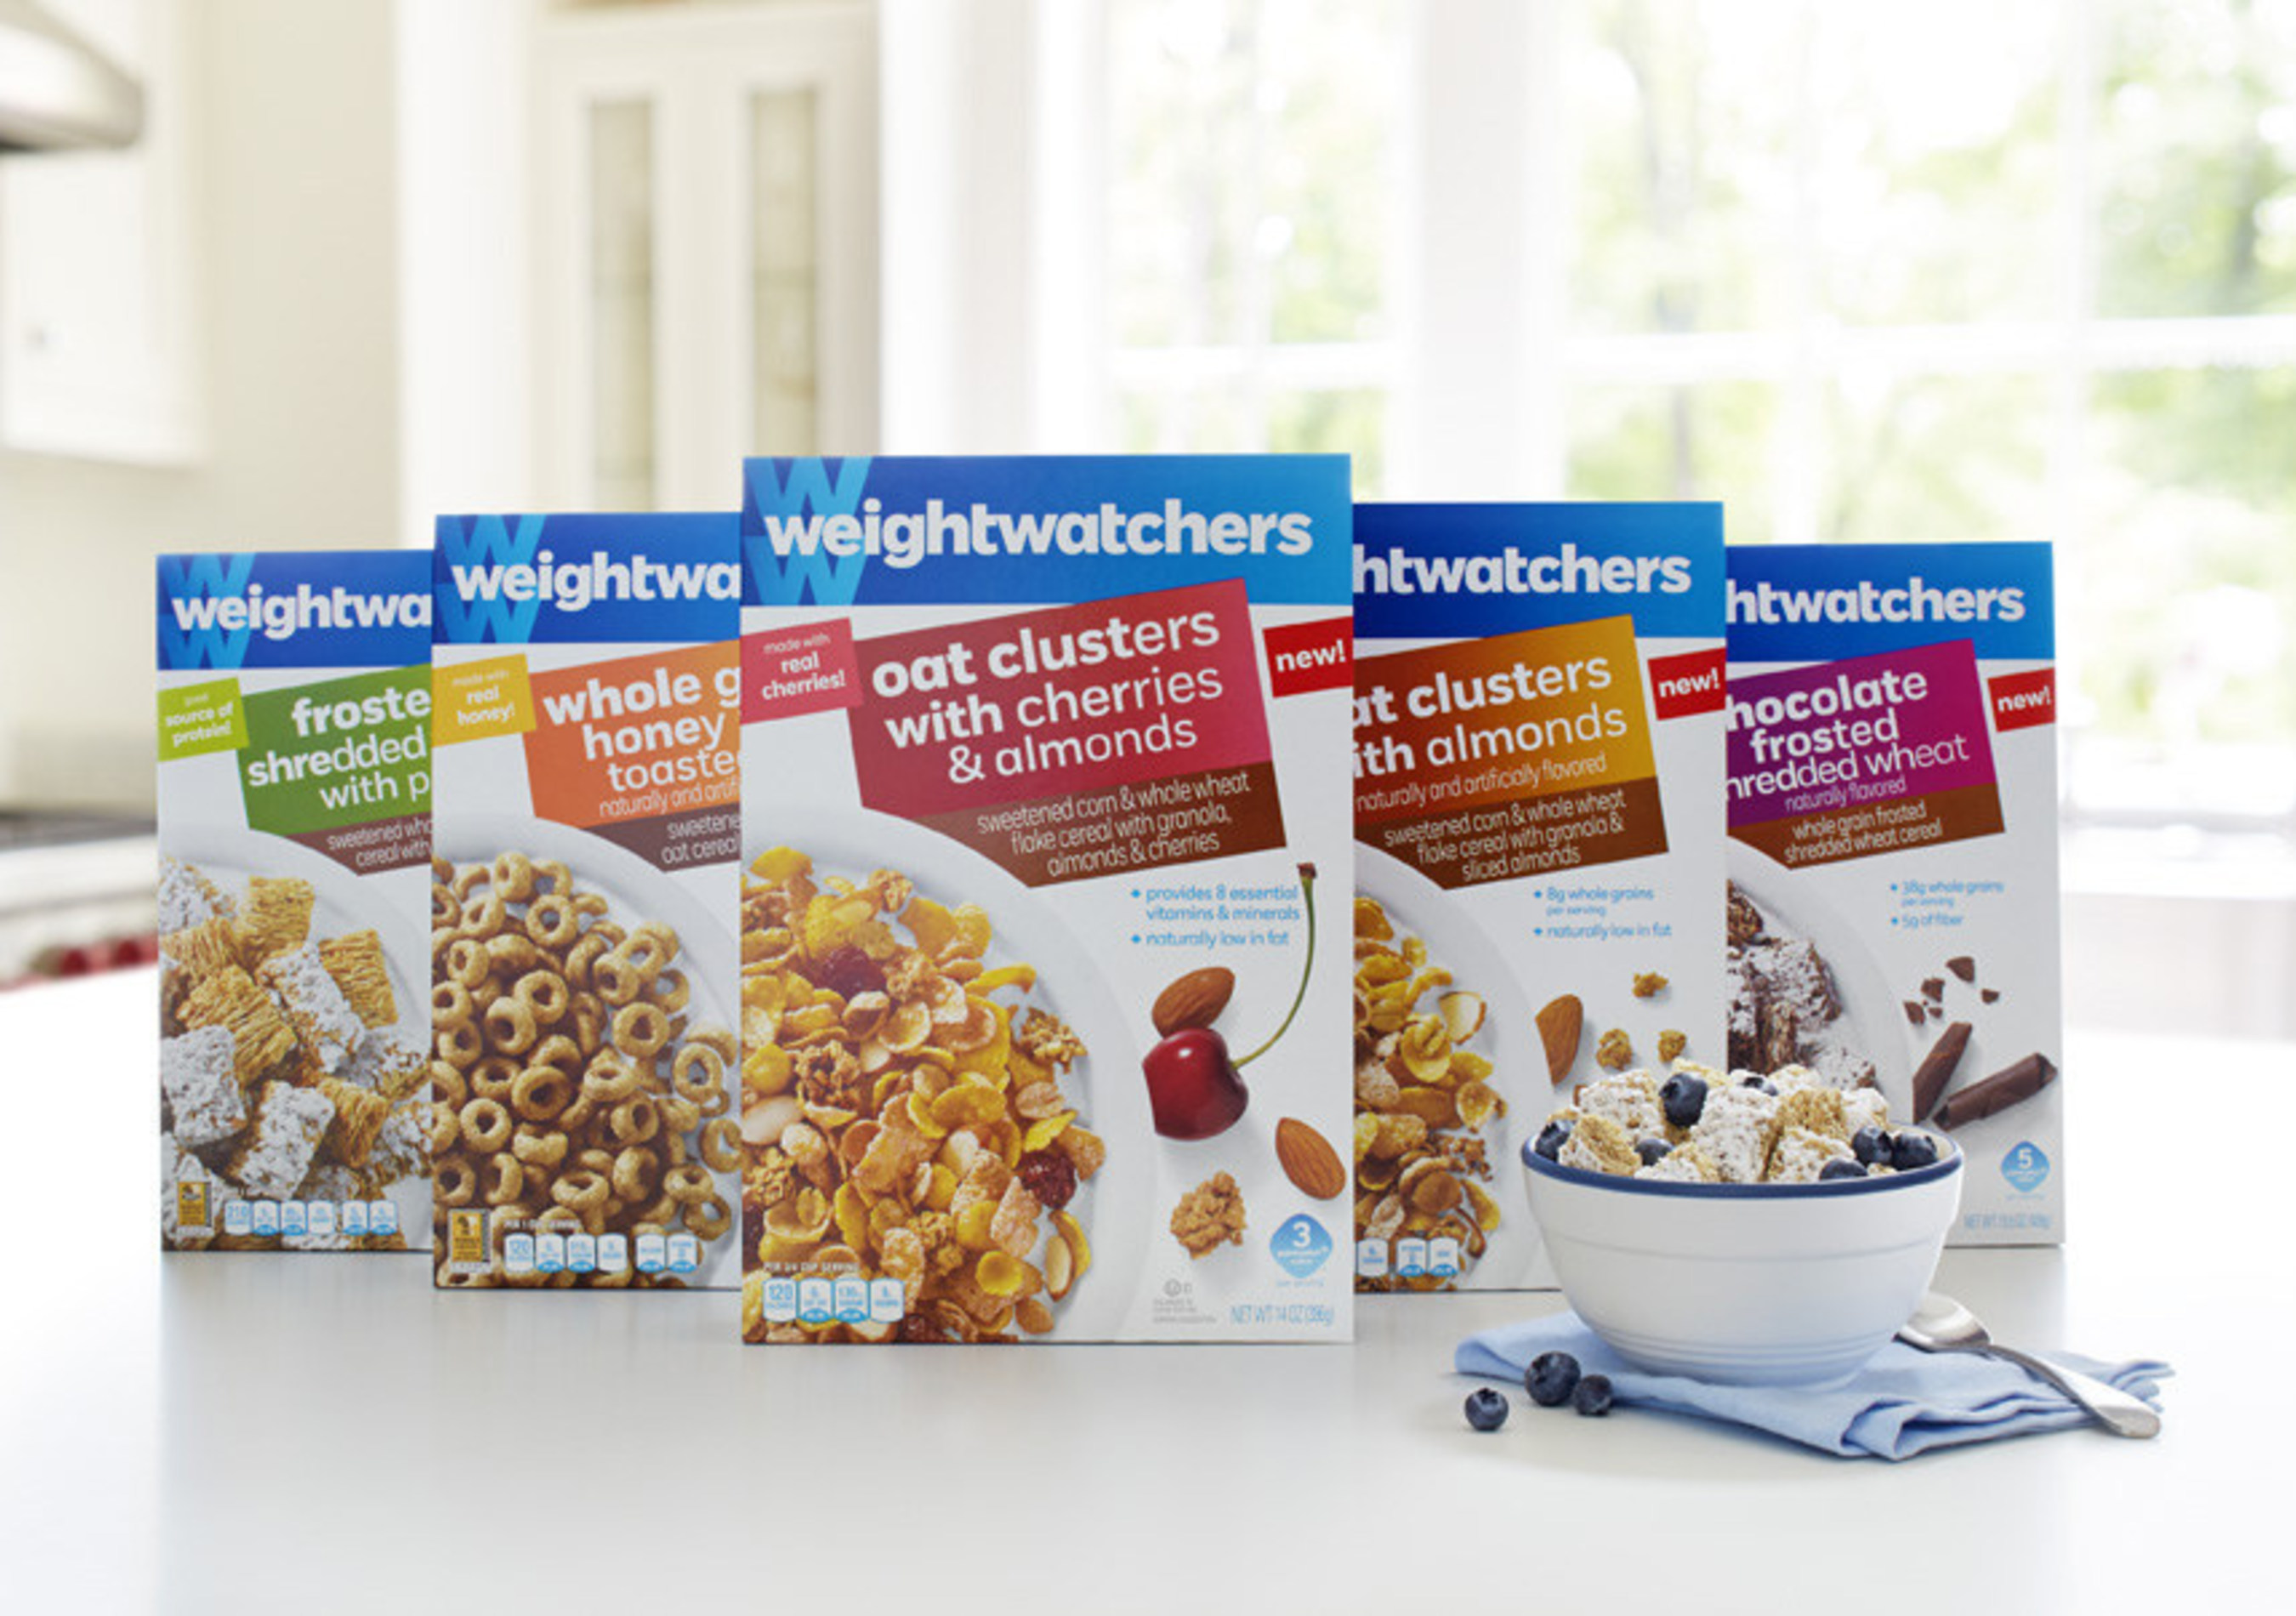 Health-focused consumers now have a delicious new breakfast choice in cereal to kick-start their New Year's resolutions. Weight Watchers(R), the world's leading provider of weight management services, has launched branded great-tasting ready-to-eat cereals. The cereals were introduced at select retailers in October 2014 and starting this month are now available nationwide. The cereals are brought to market with the help of MOM Brands(R), the largest family-owned cereal company in the United States, which...